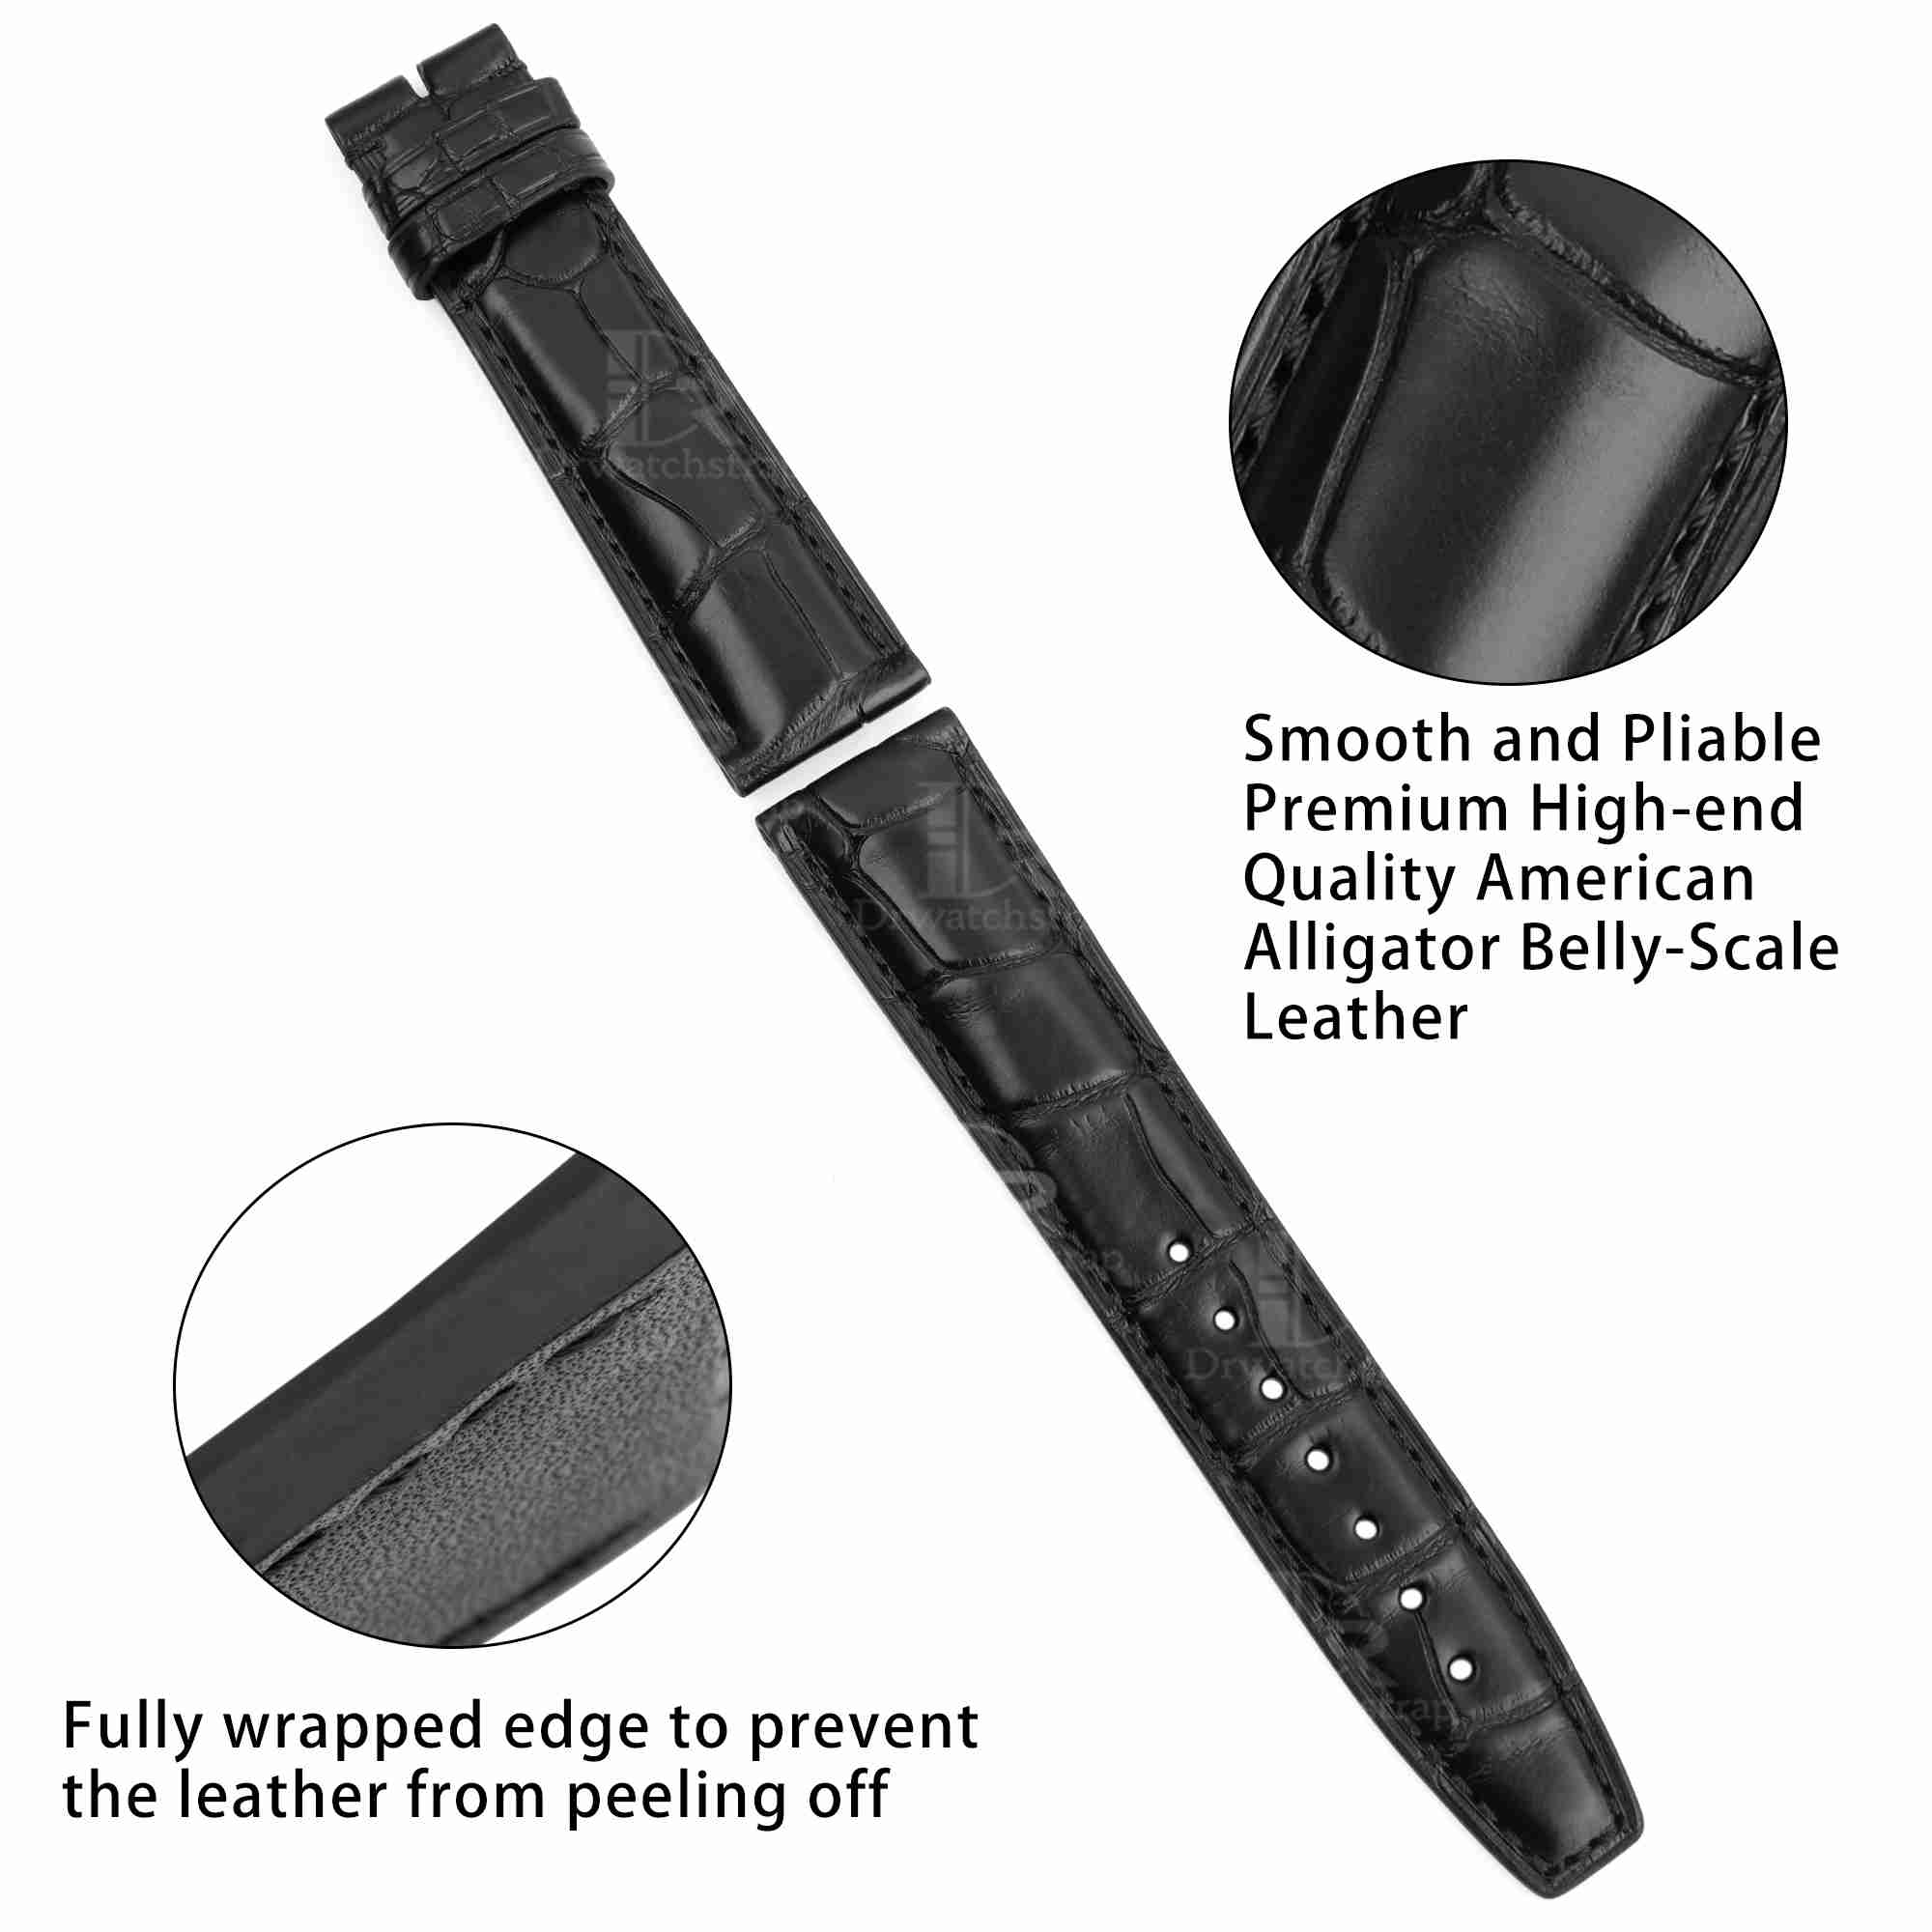 Genuine best quality alligator black IWC leather watch straps replacement watchbands for IWC Portofino / Portuguese Chronograph watches online for sale at a low price - Shop the high-end quality watch bands from dr watchstrap